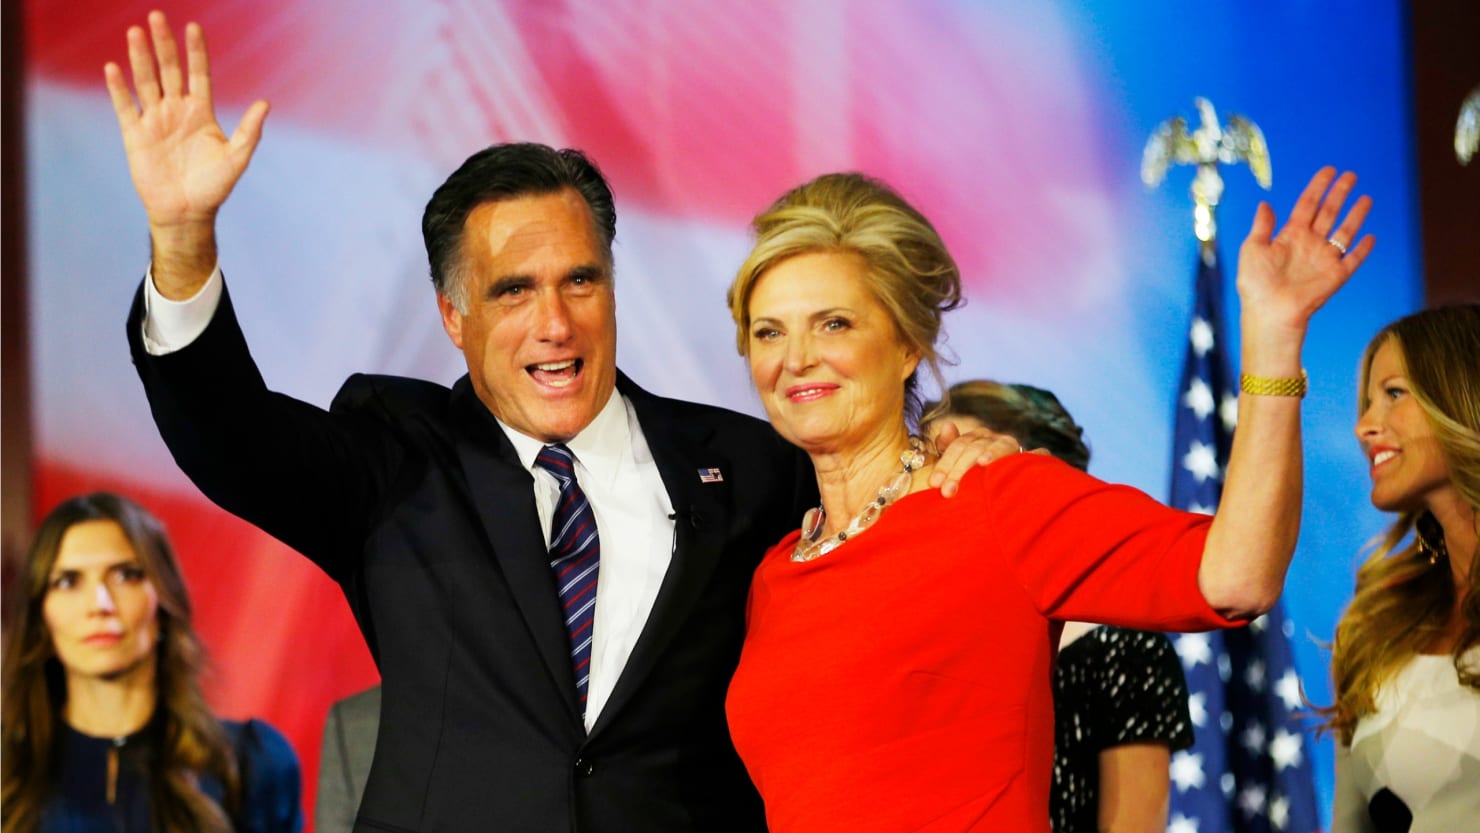 Mitt Romney Says He Voted for His Wife for President in 2016